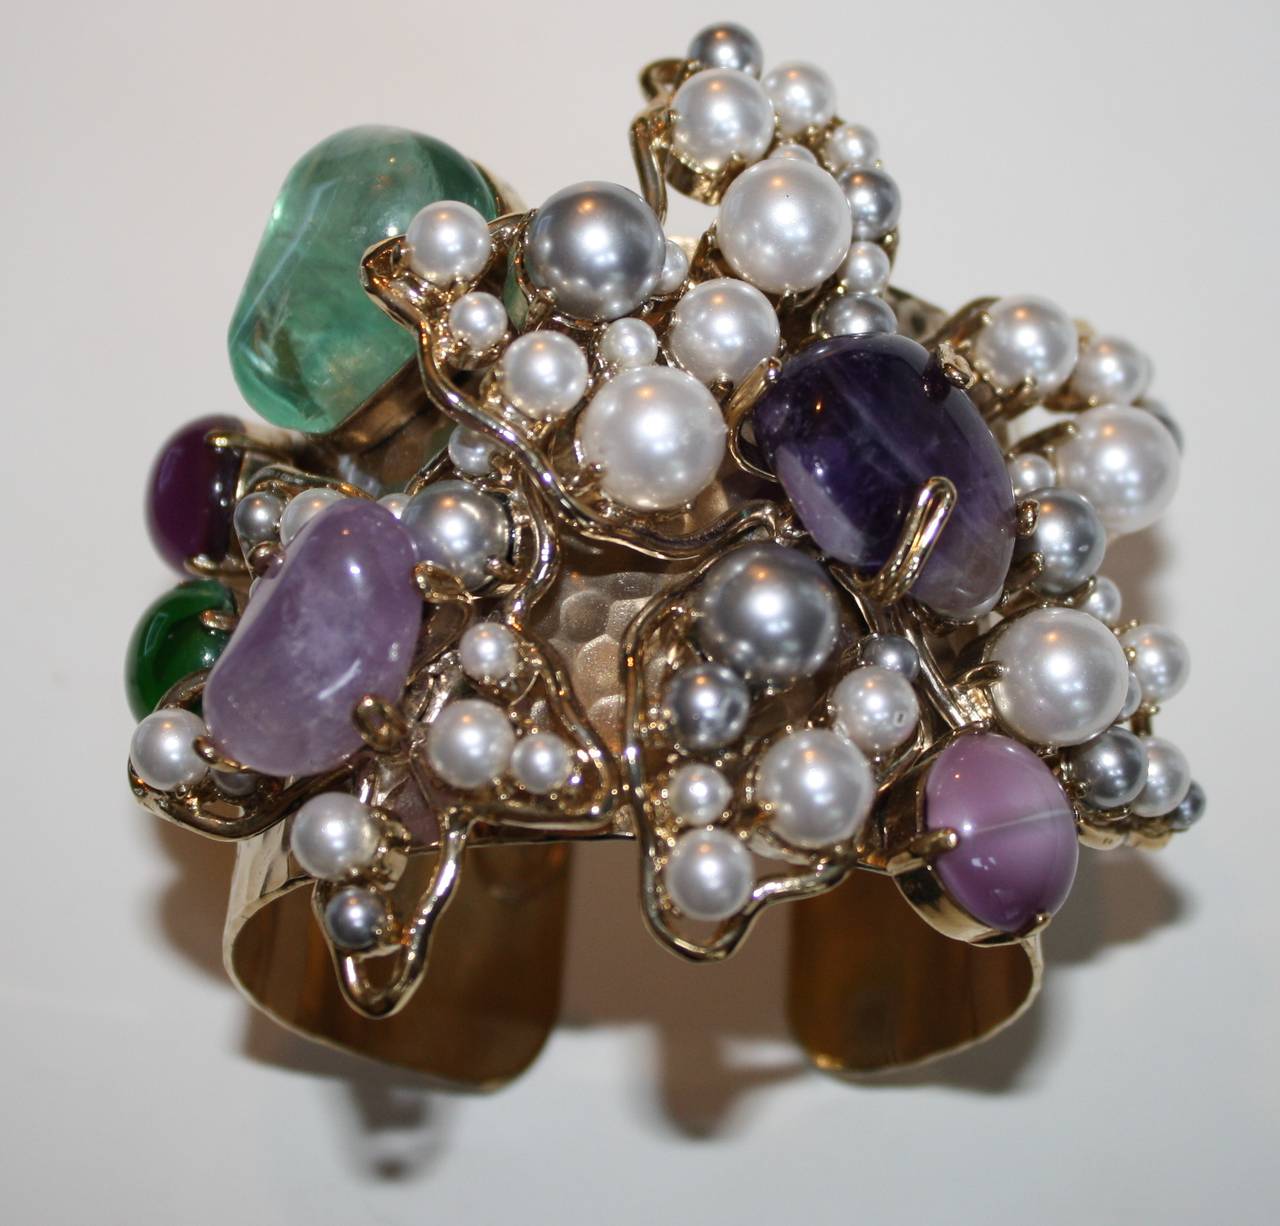 Pale gold coated cuff made with Swarovski beads, glass cabochons, fluorine, and amethyst from Philippe Ferrandis.

Designer Biography:

Philippe Ferrandis has been designing costume fashion jewelry and accessories since 1986. Based in Paris,